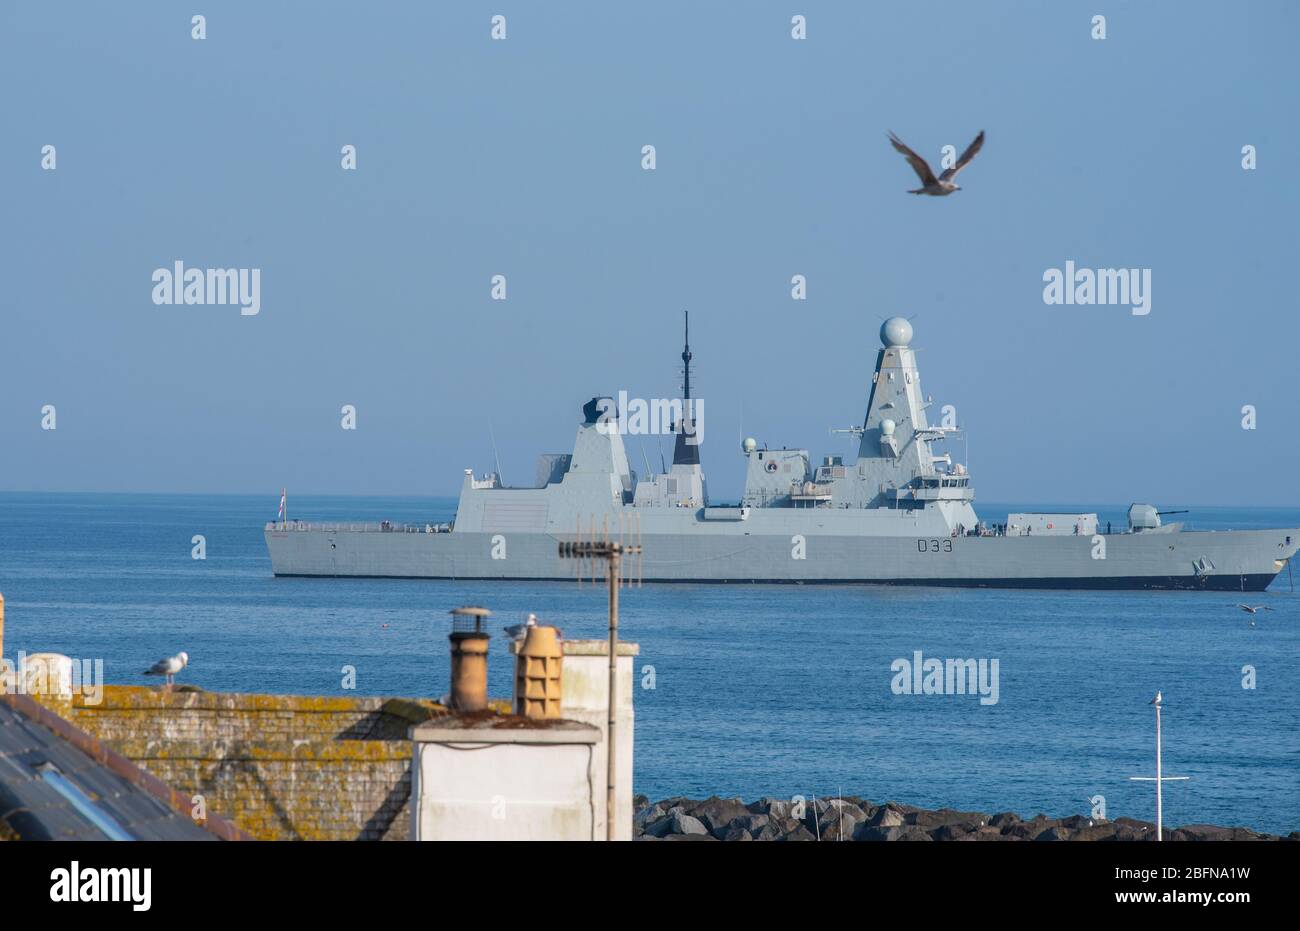 Lyme Regis, Dorset, UK. 19th Apr, 2020. UK Weather: Royal Navy Type 45 Destroyer HMS Dauntless observes social distancing on a warm and sunny afternoon during the coronavirus lockdown. An announcement was heard reminding the ship's company to stay 2 meters apart when on deck. Credit: Celia McMahon/Alamy Live News Stock Photo